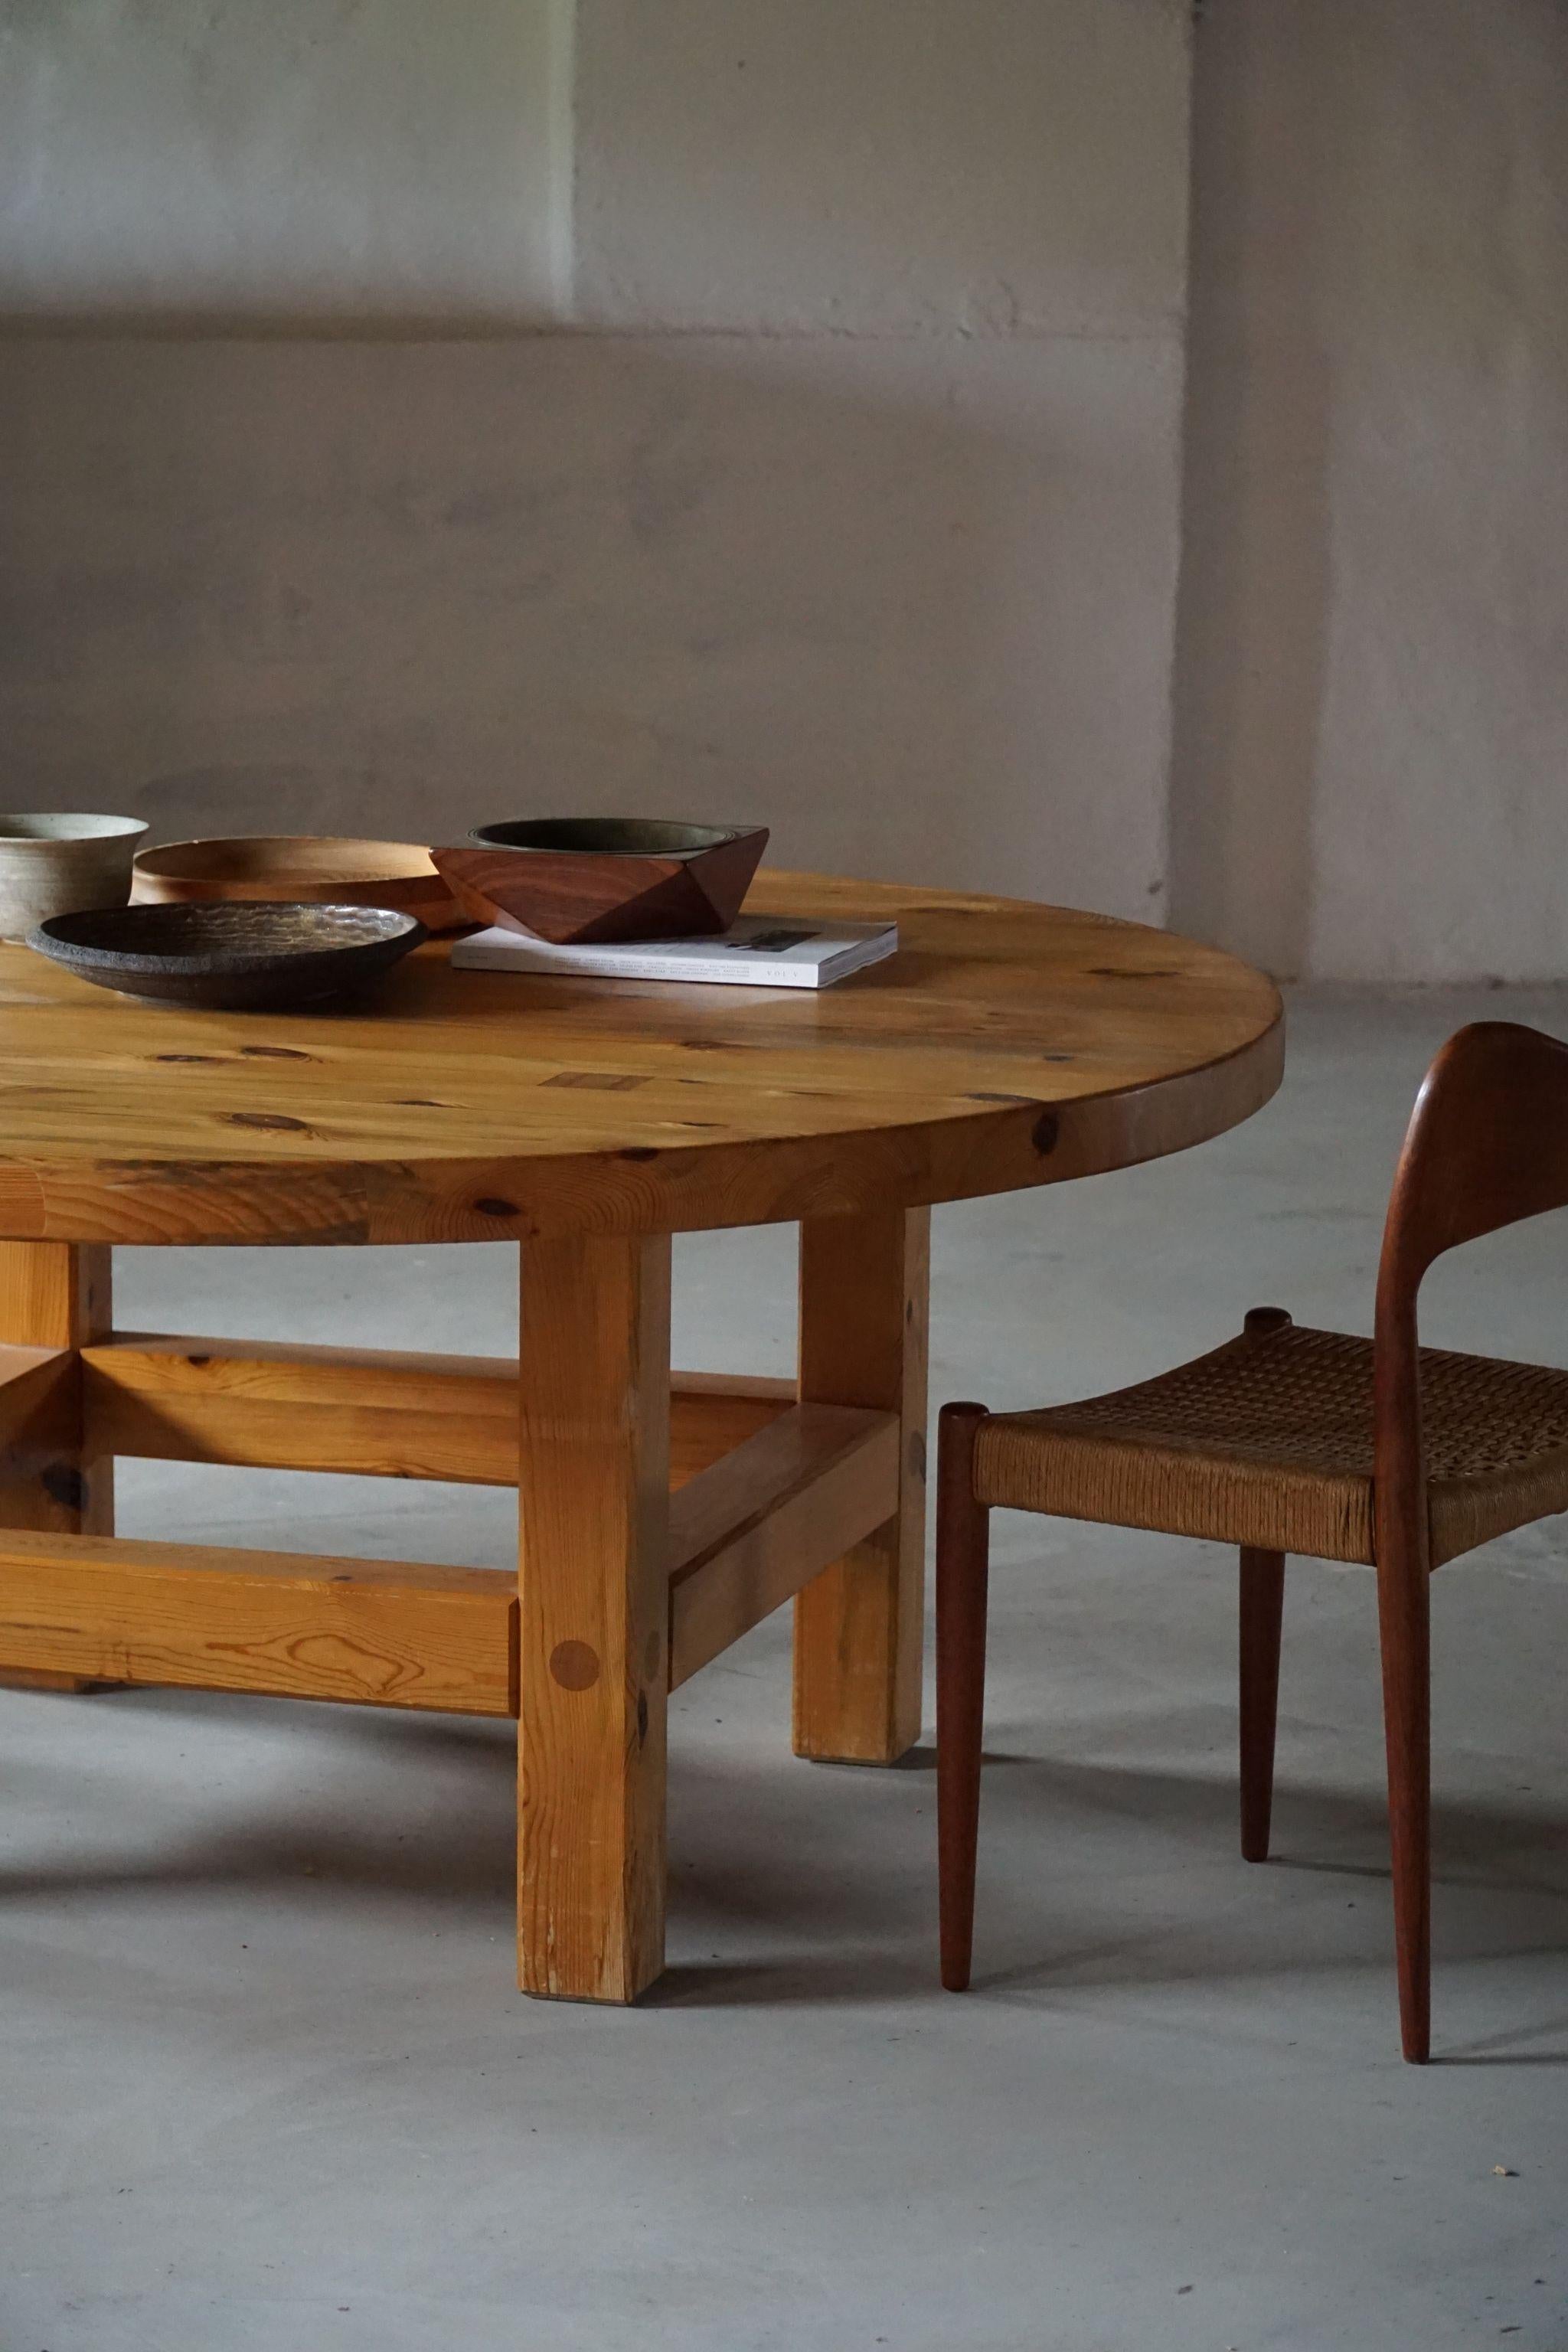 Hand-Crafted Sven Larsson, Large Round Dining Table in Solid Pine, Swedish Modern, 1960s For Sale